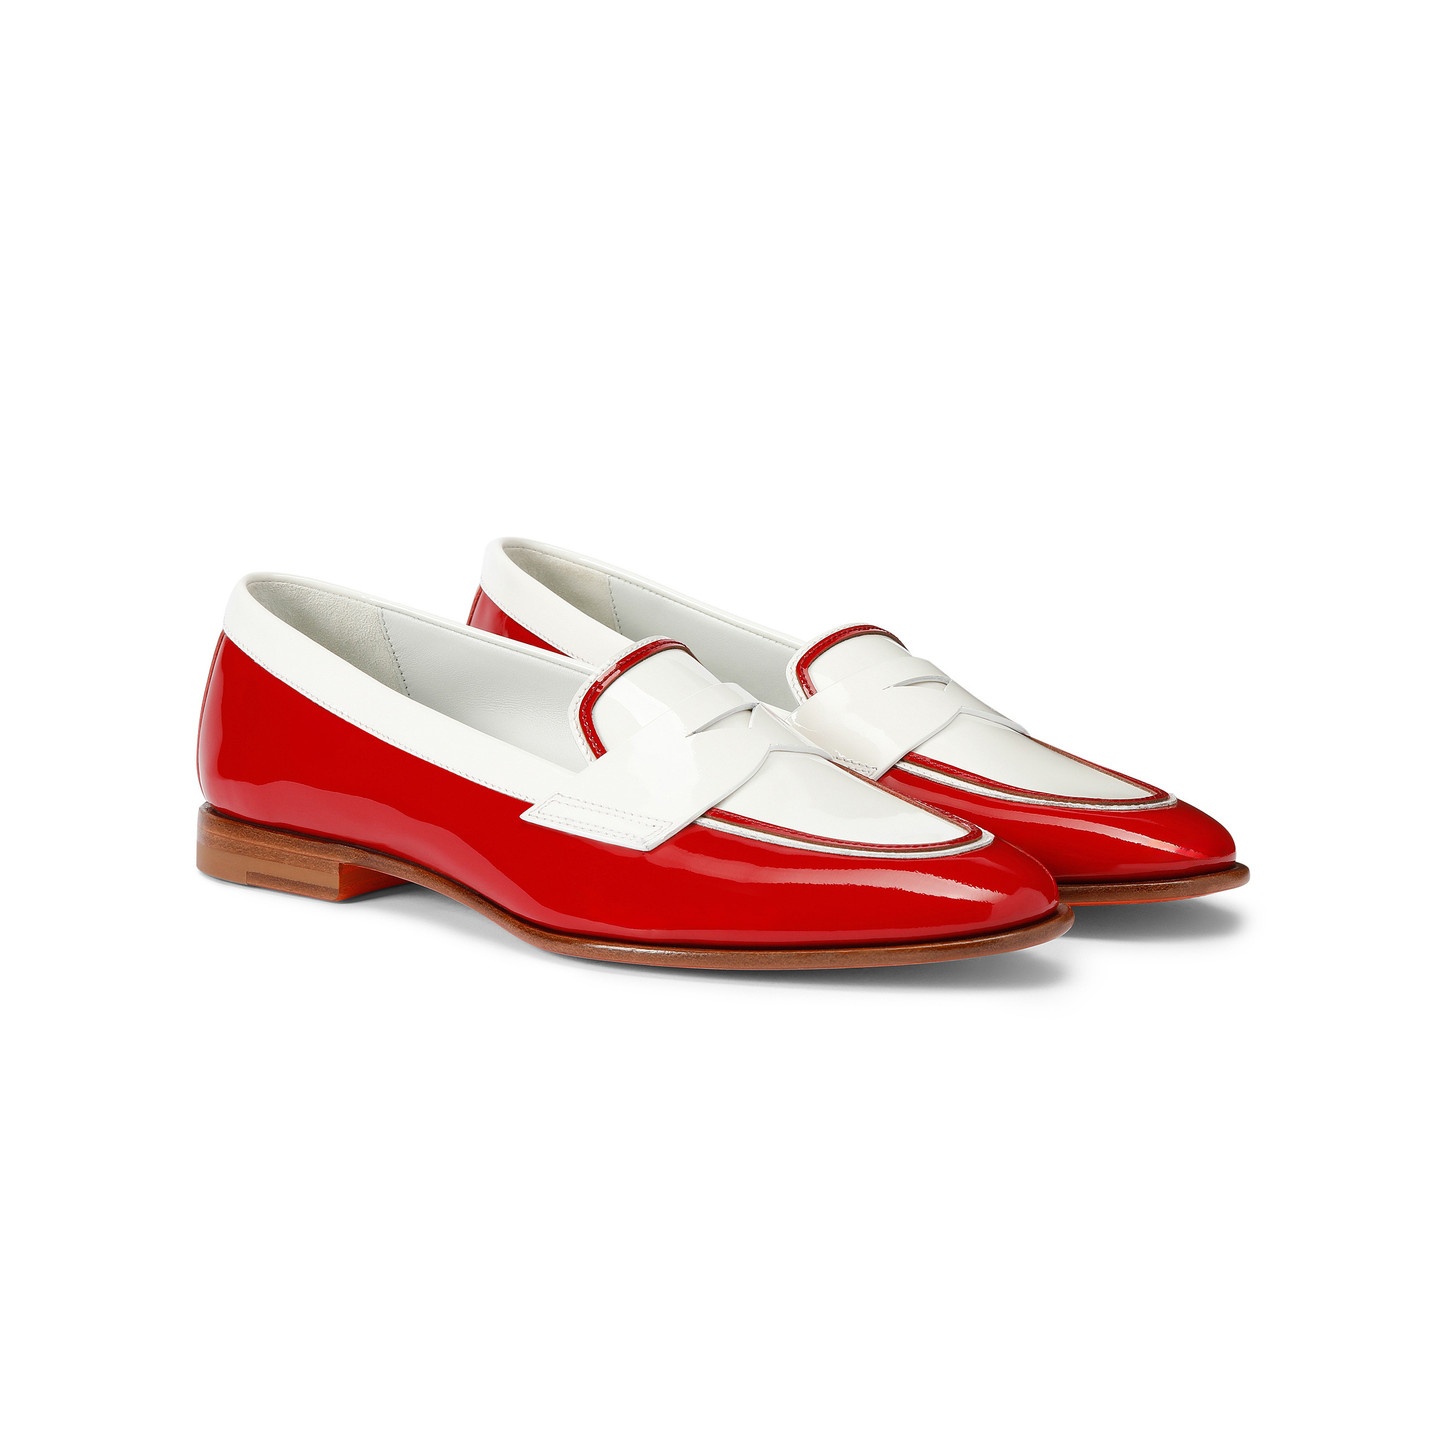 Women's red and white patent leather penny loafer - 3